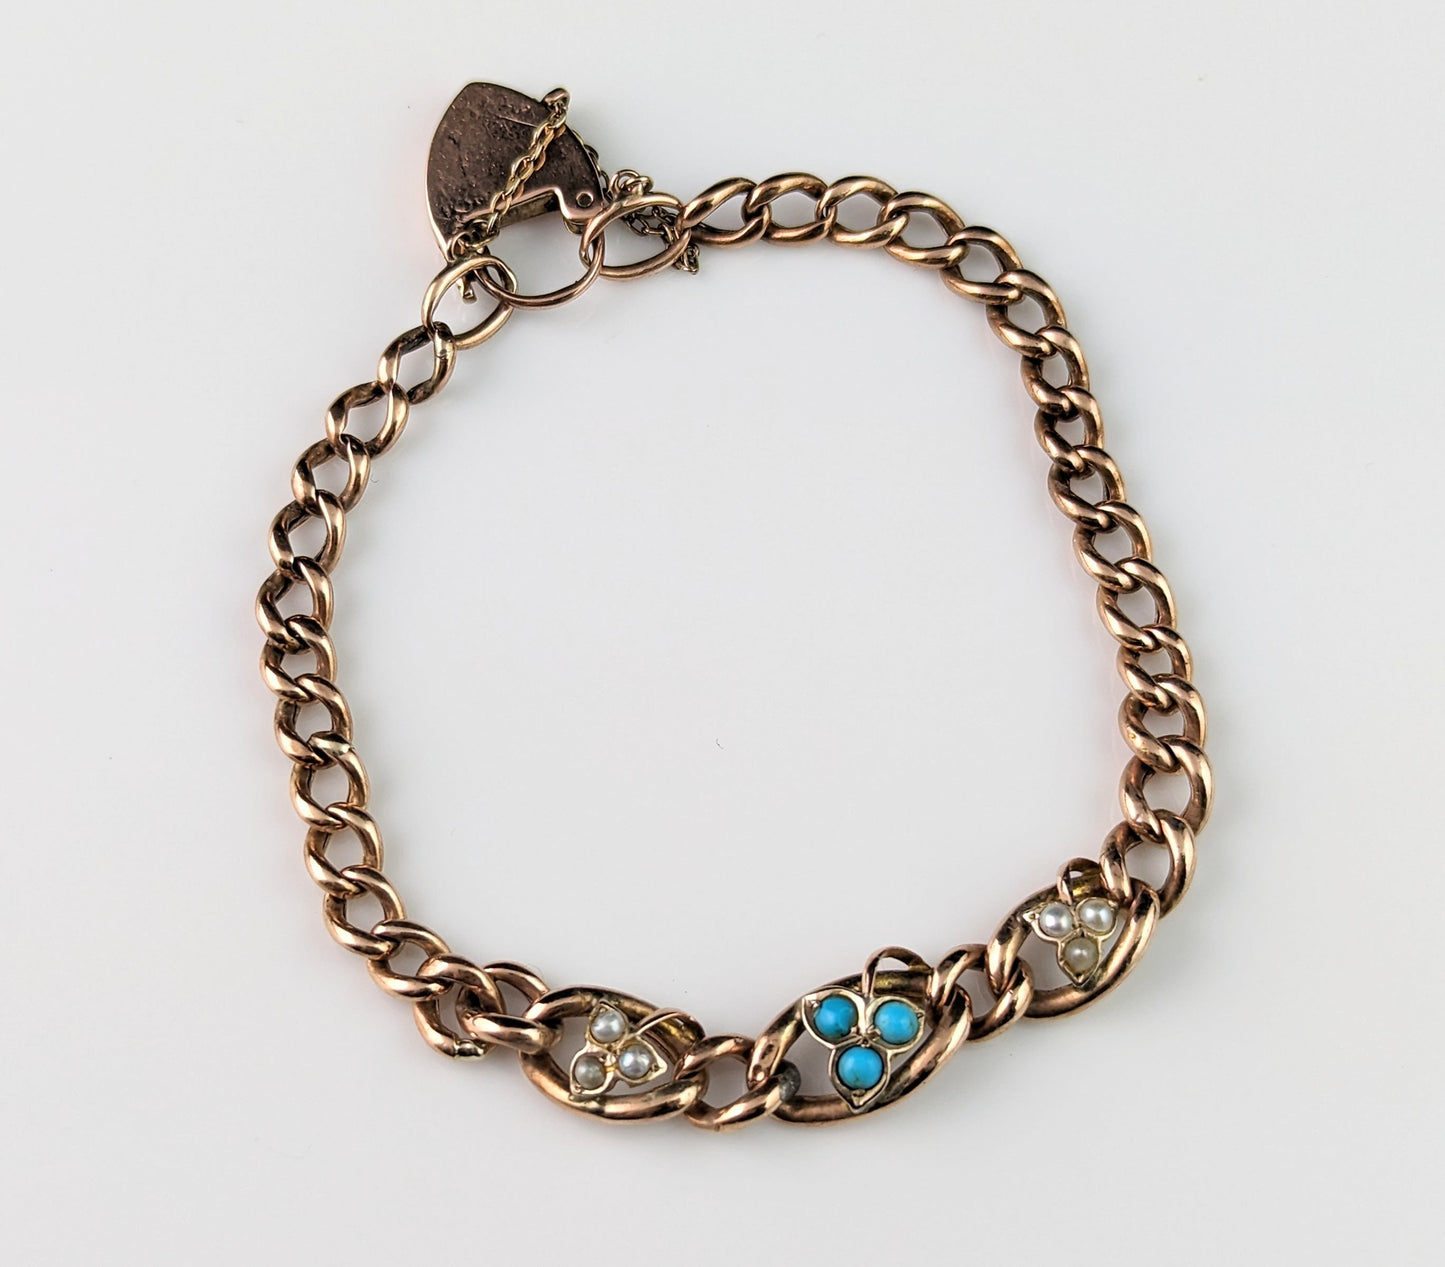 Antique 9ct gold curb bracelet, Turquoise and pearl leaves, Edwardian